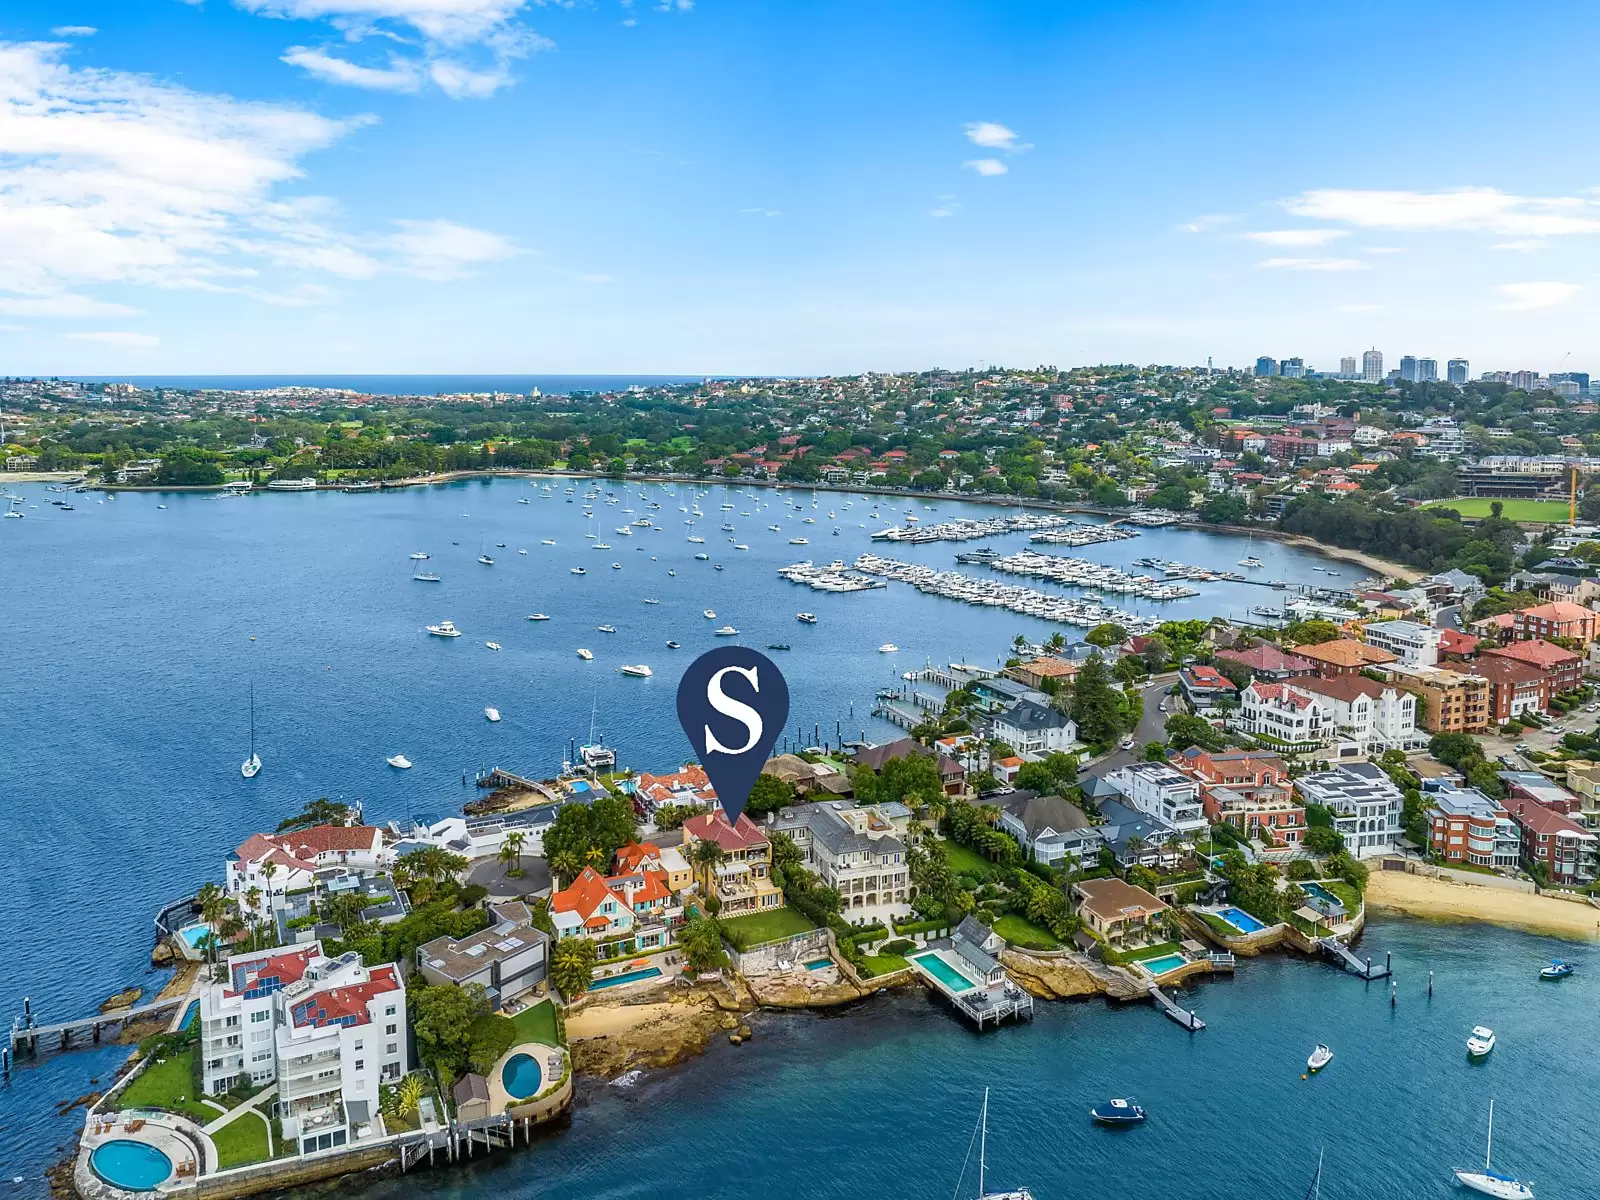 Photo #22: 2/58 Wunulla Road, Point Piper - Sold by Sydney Sotheby's International Realty